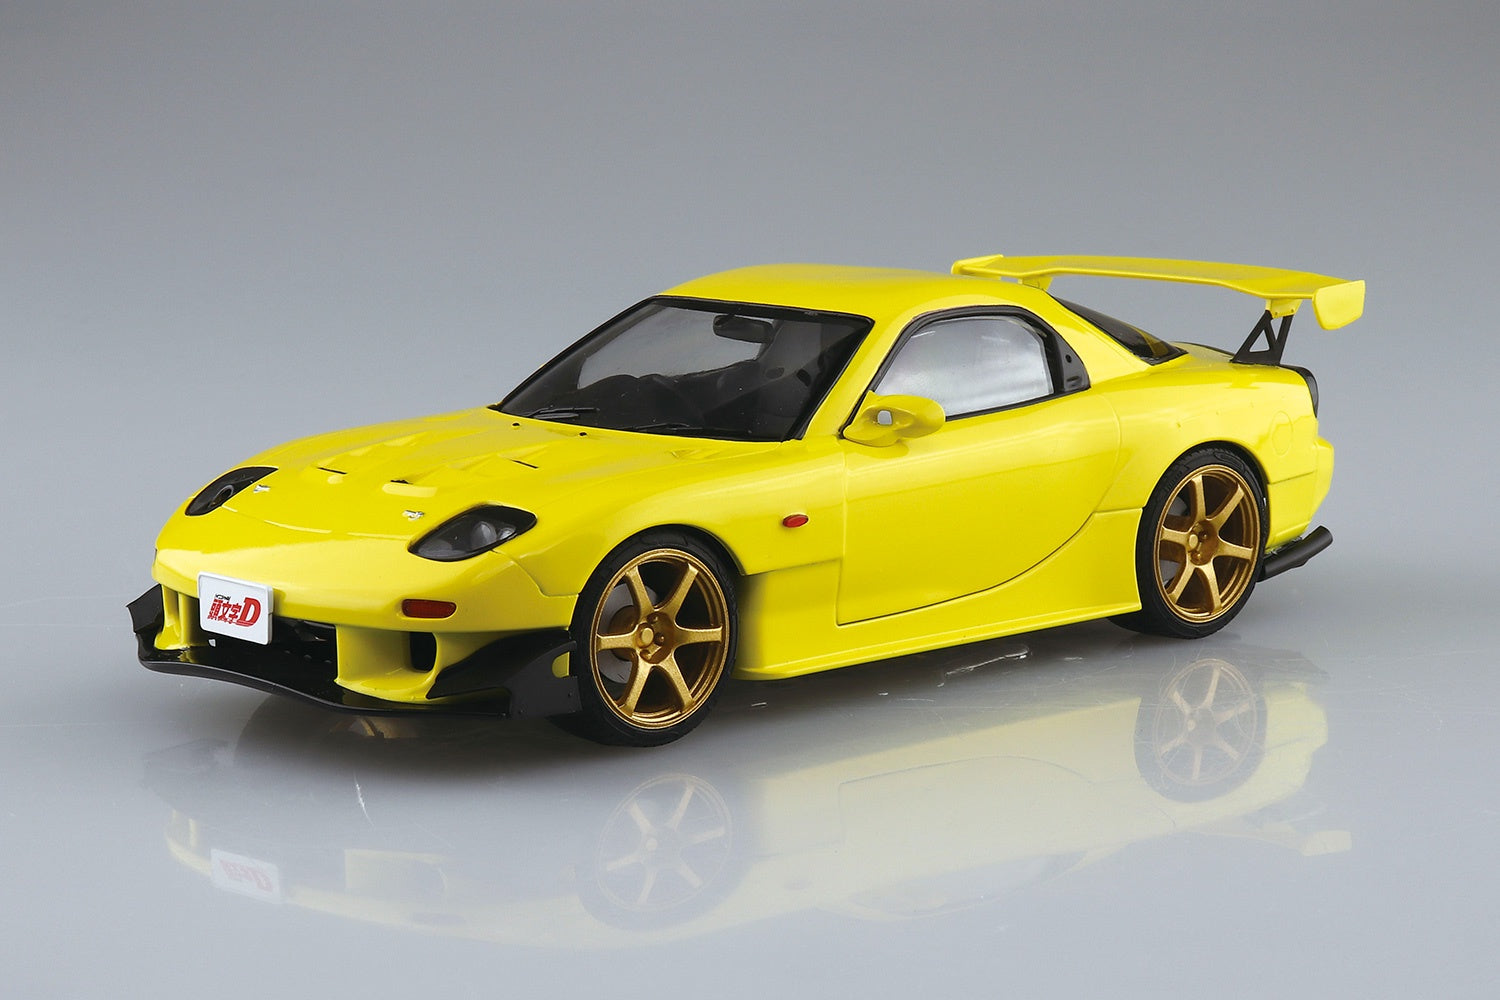 Pre-Painted Initial D Takahashi Keisuke FD3S RX-7 Project D Comics Vol.28 Ver. Model Kit 1/24 #06402 by Aoshima